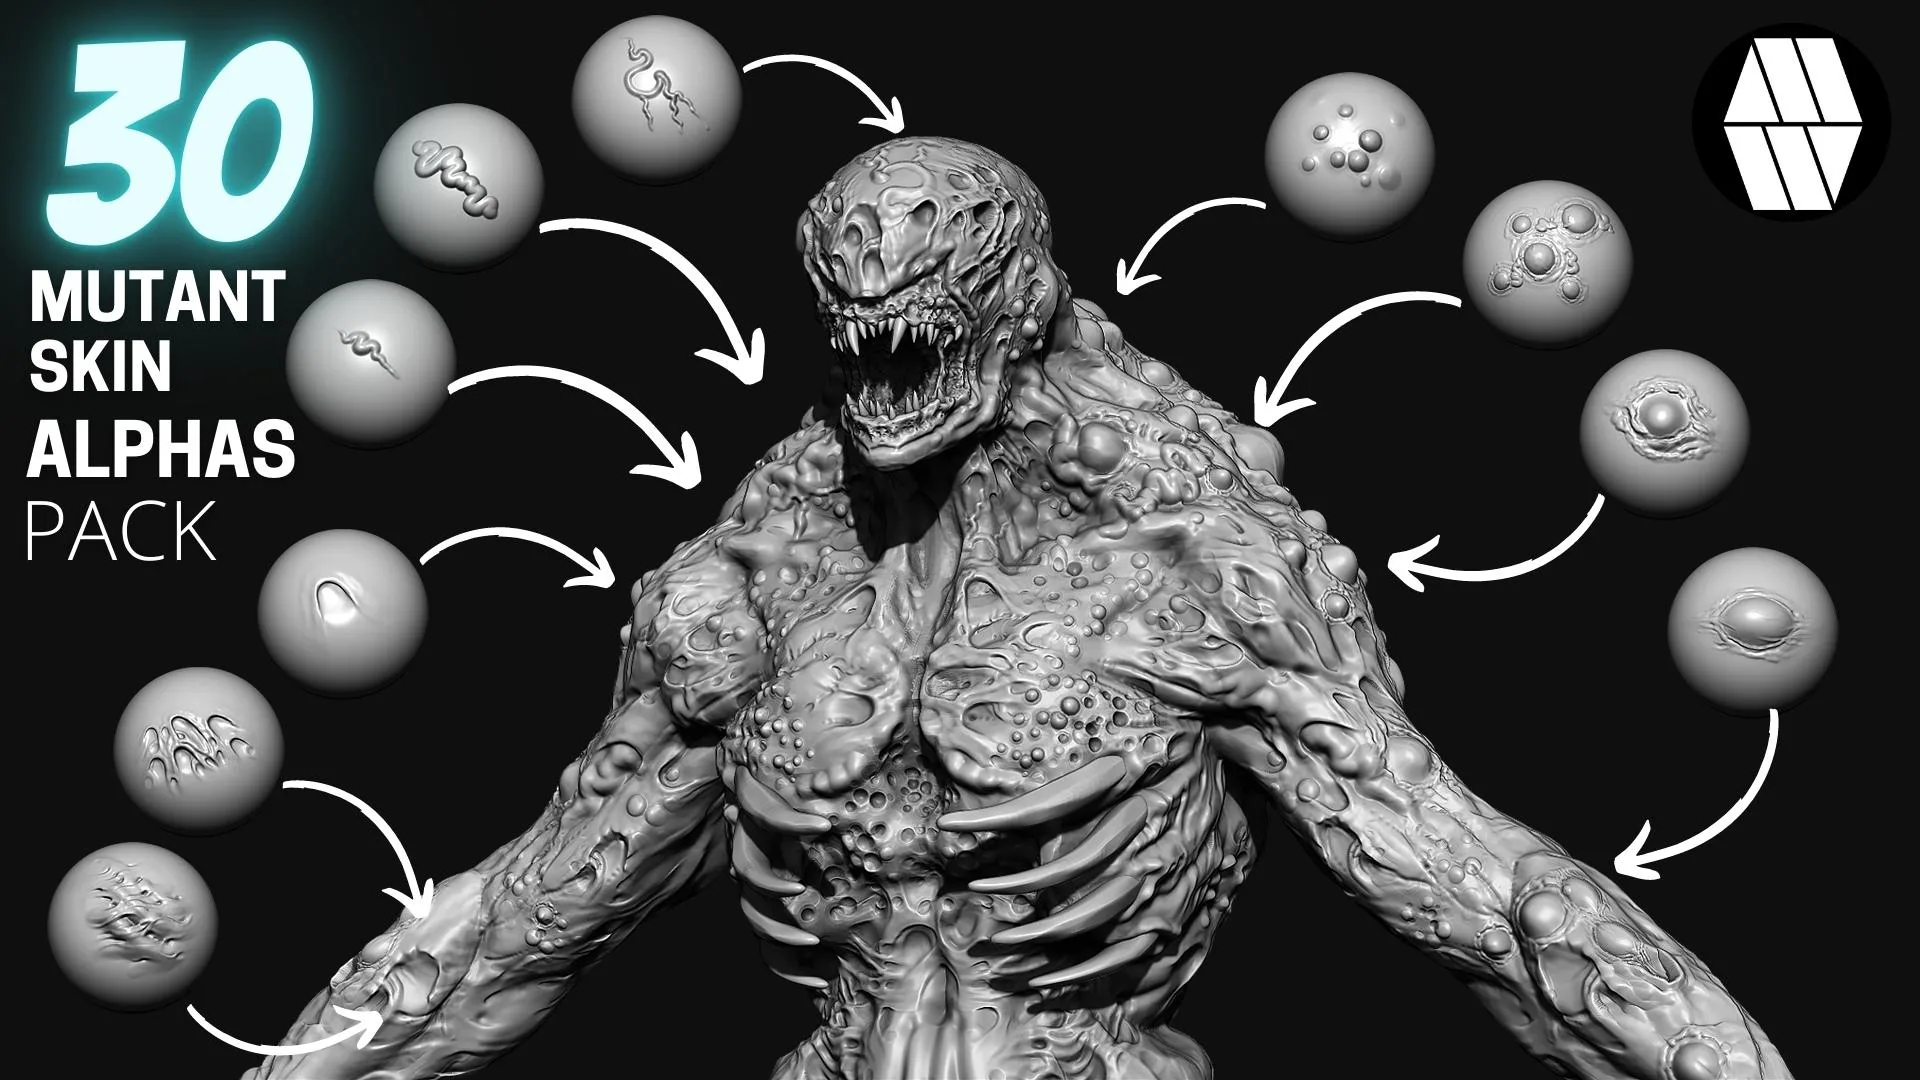 30 Mutant Skin Alphas and VDM Brushes - Custom made Skin Alphas to use in ZBrush